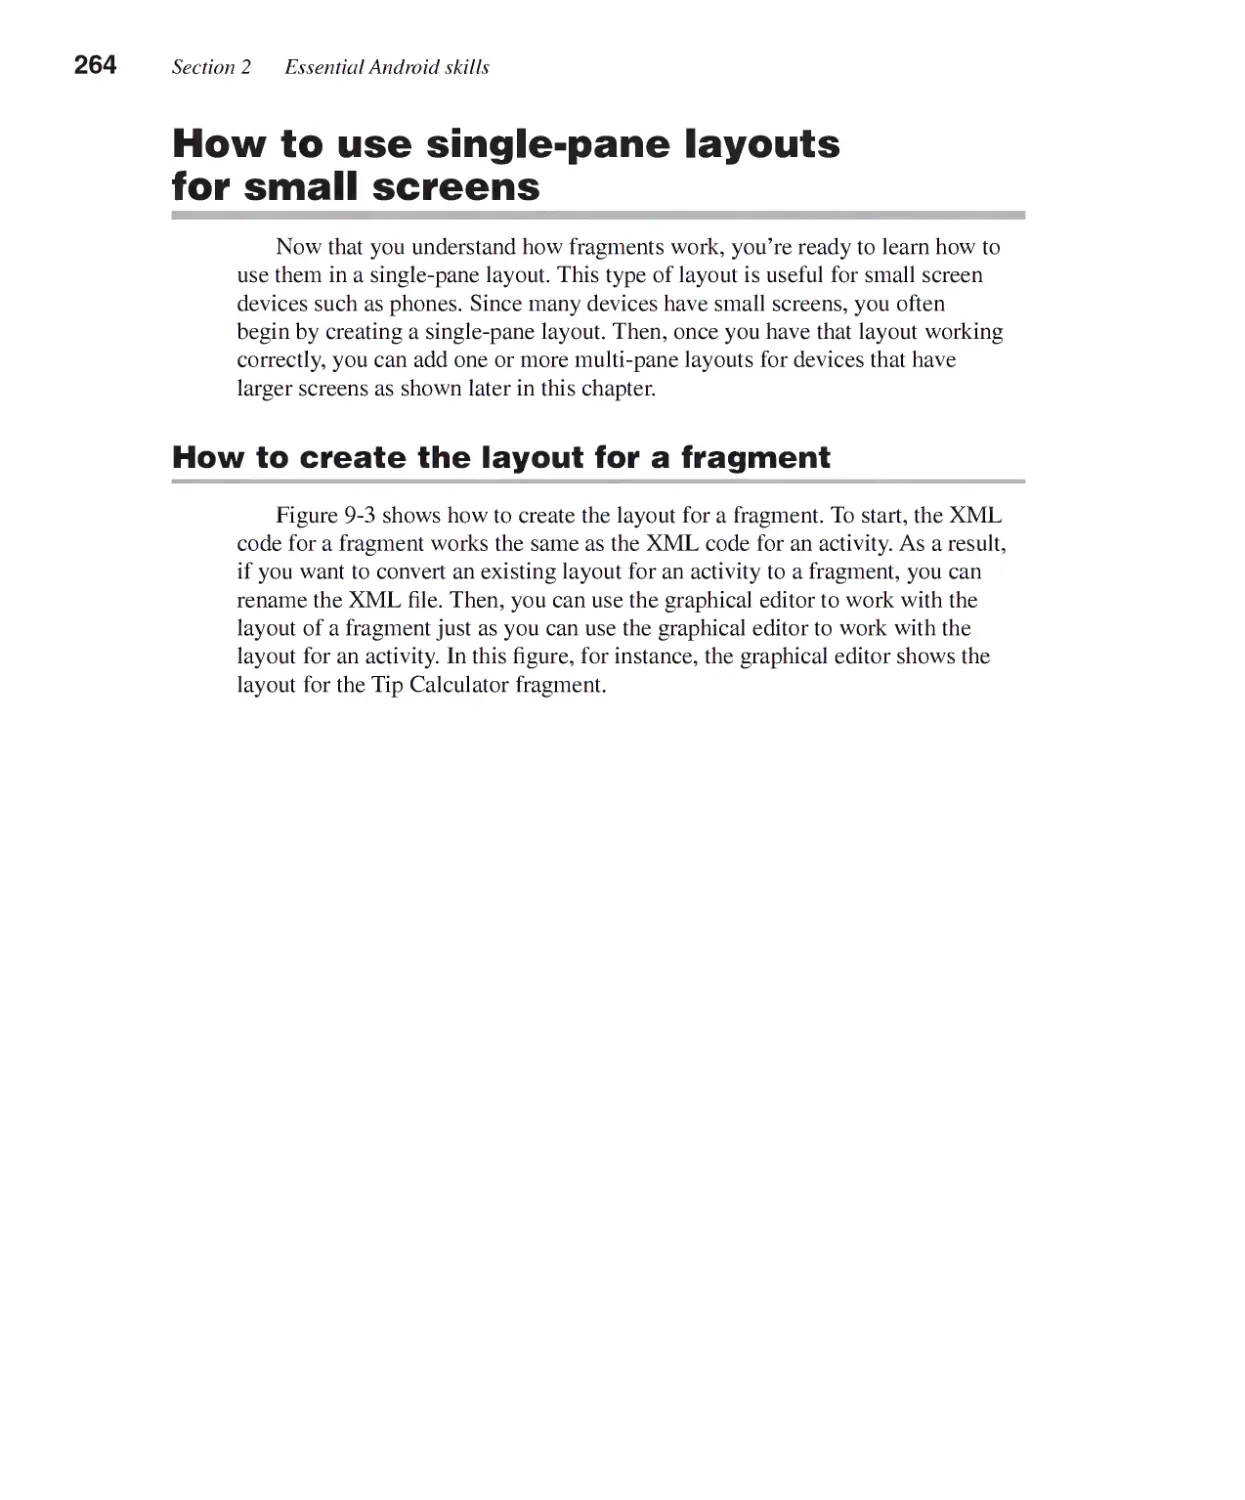 How to Use Single-Pane Layouts for Small Screens